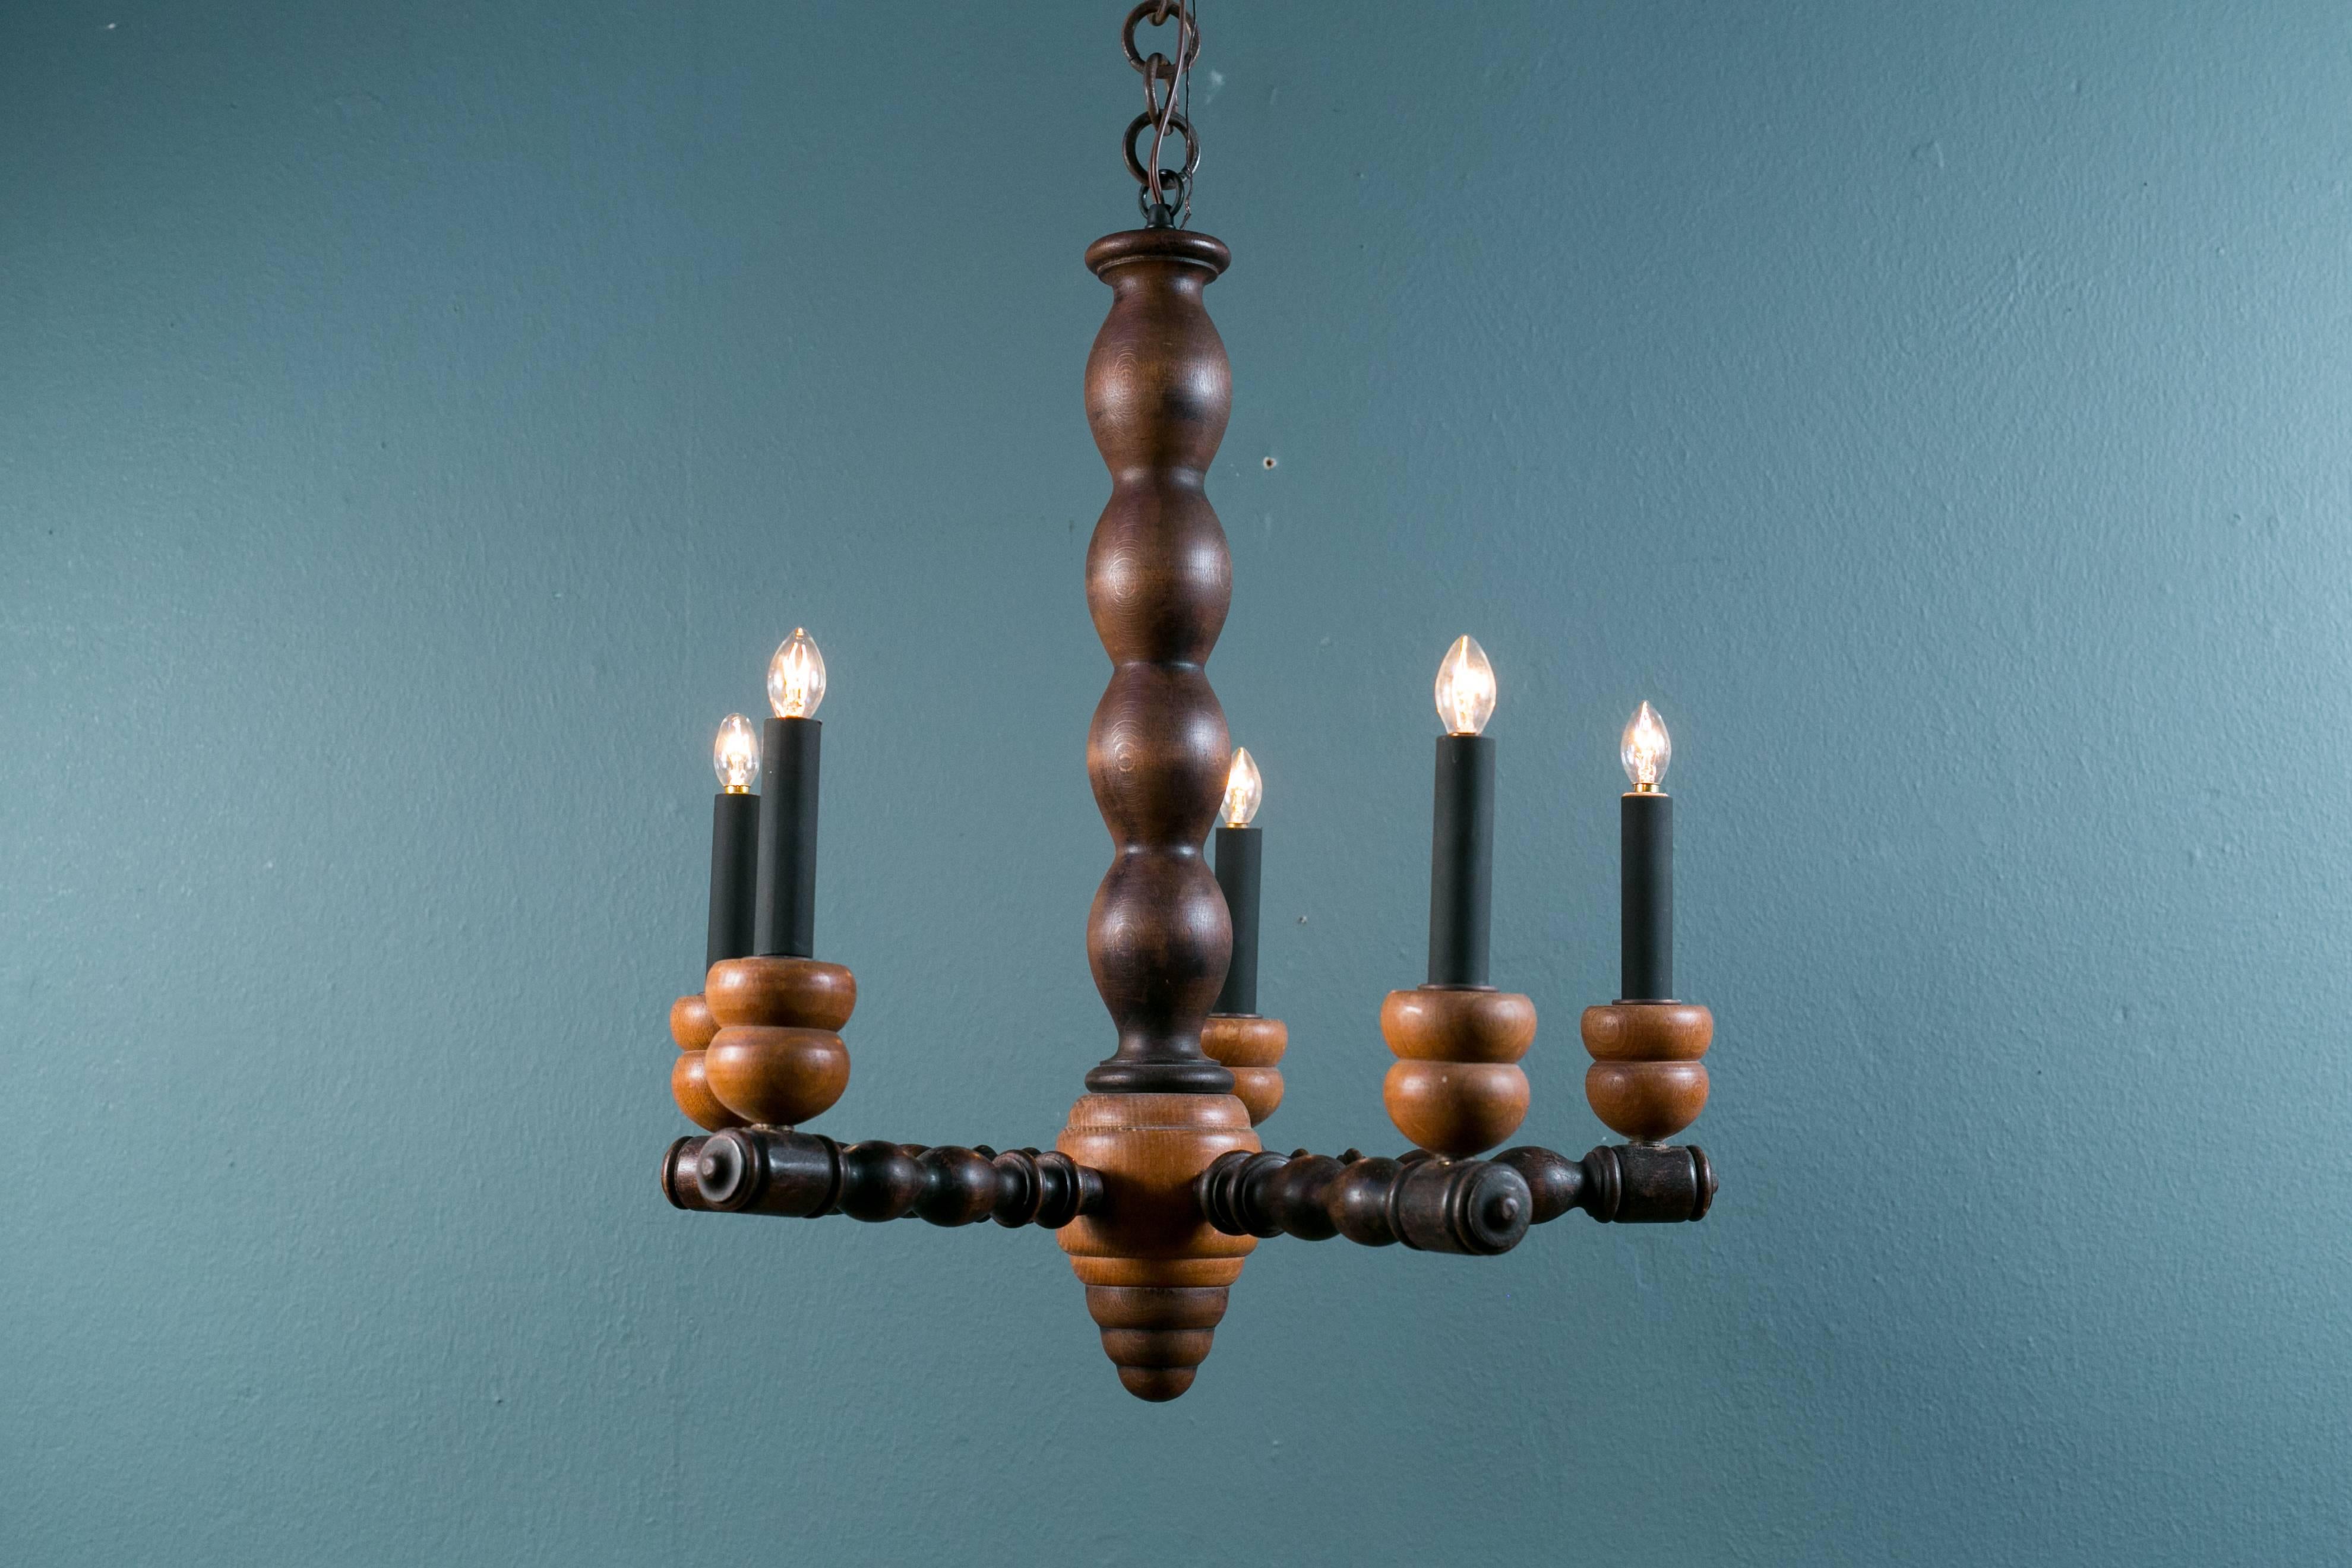 Three-toned, bobbin turned wood chandelier with five arms from England. Charming, primitive country style vintage light.  Newly rewired in the USA with all UL approved parts, handmade iron chain and a hand-made iron canopy.  Your choice of white or